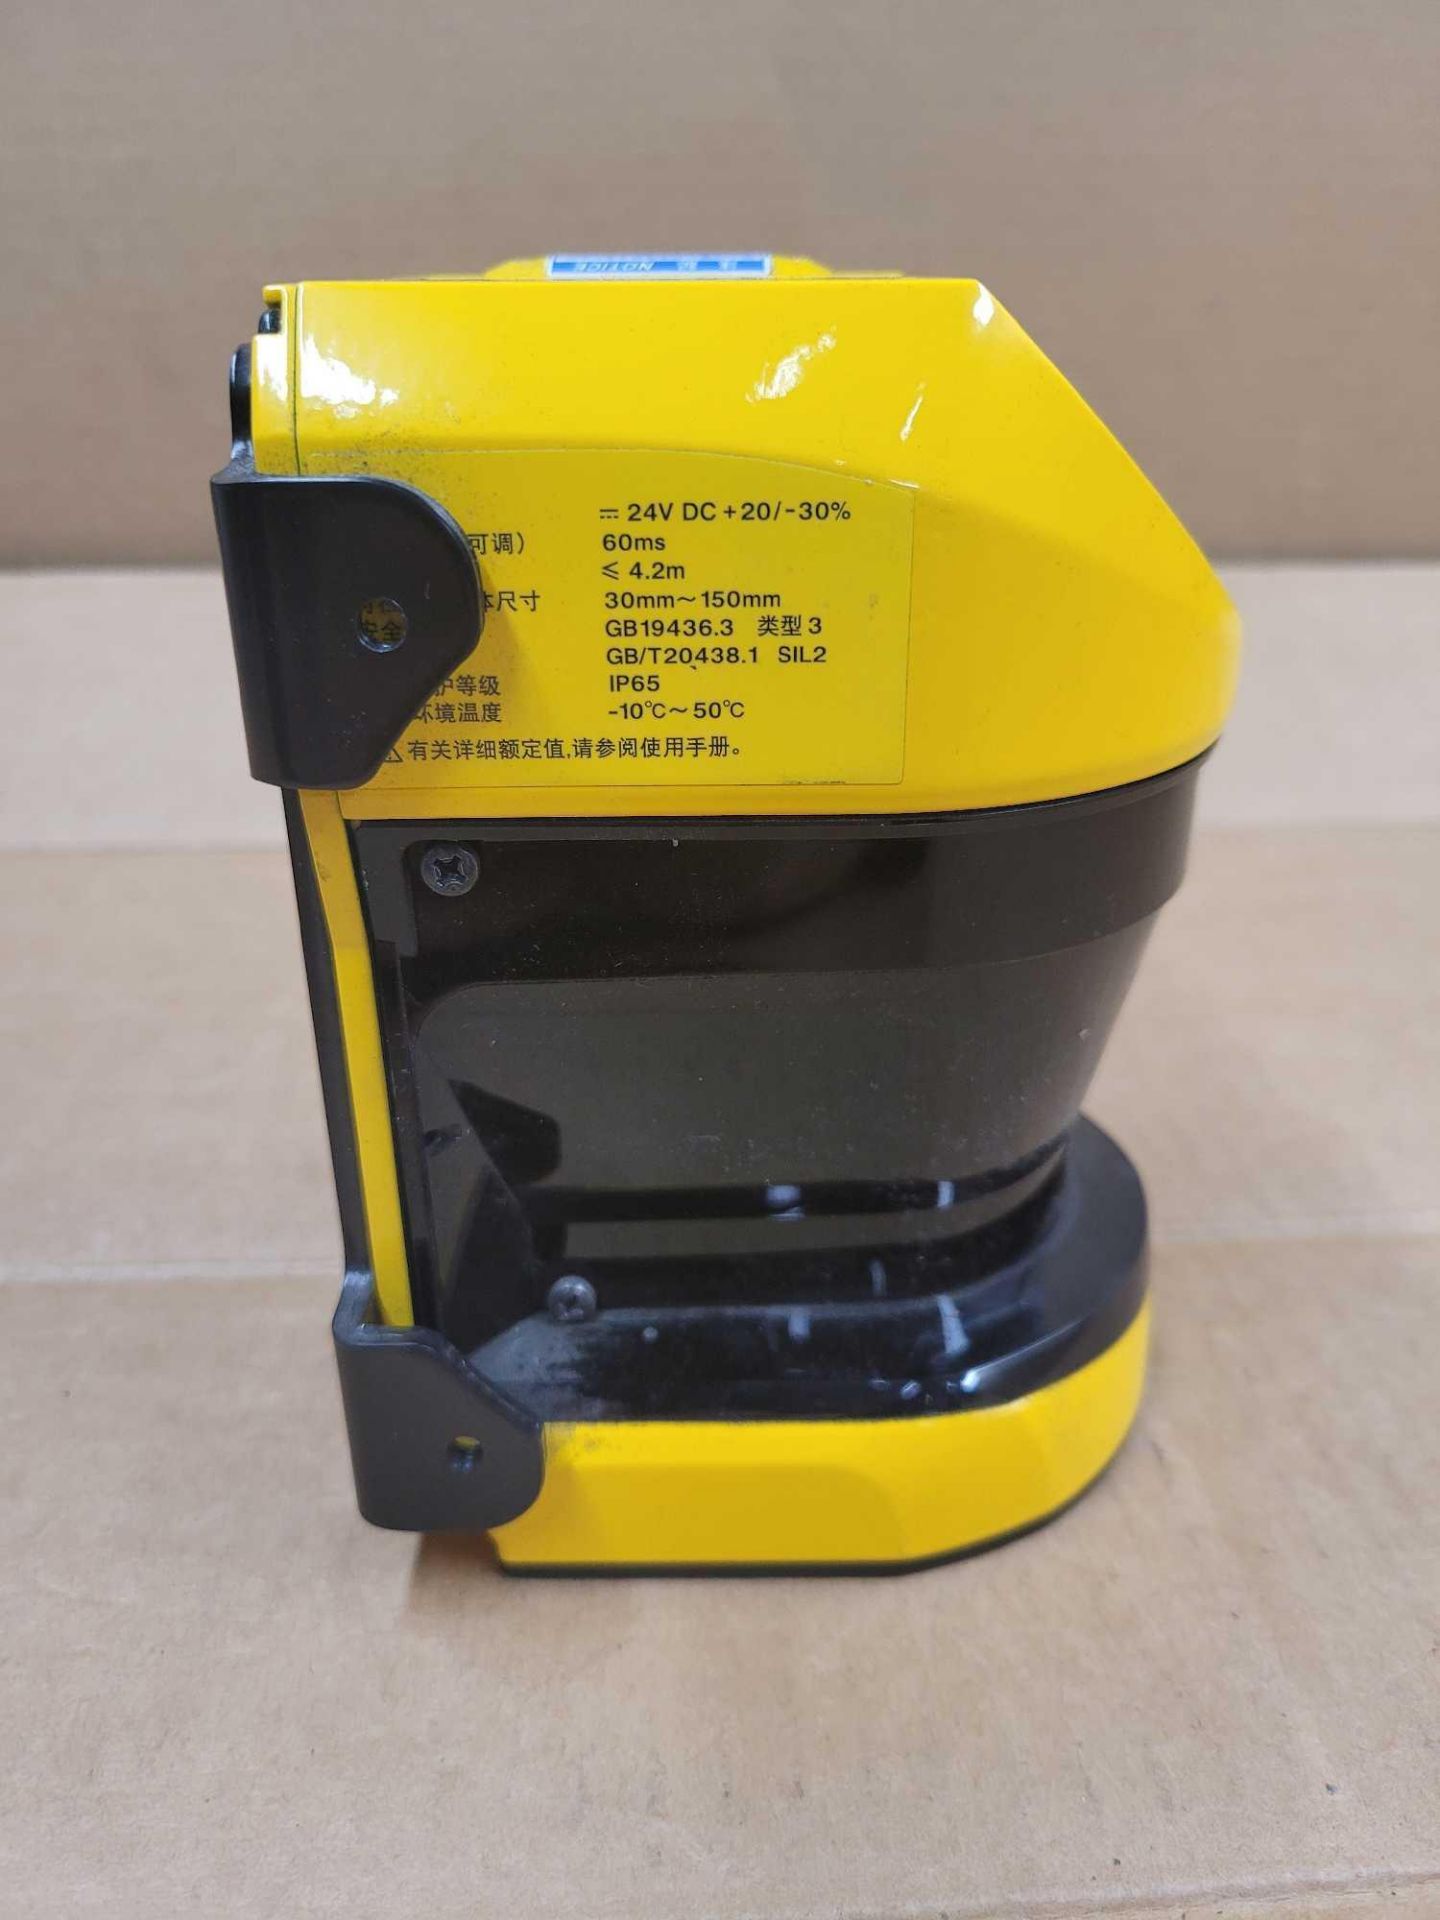 KEYENCE SZ-16V / Safety Laser Scanner  /  Lot Weight: 4.0 lbs - Image 5 of 8